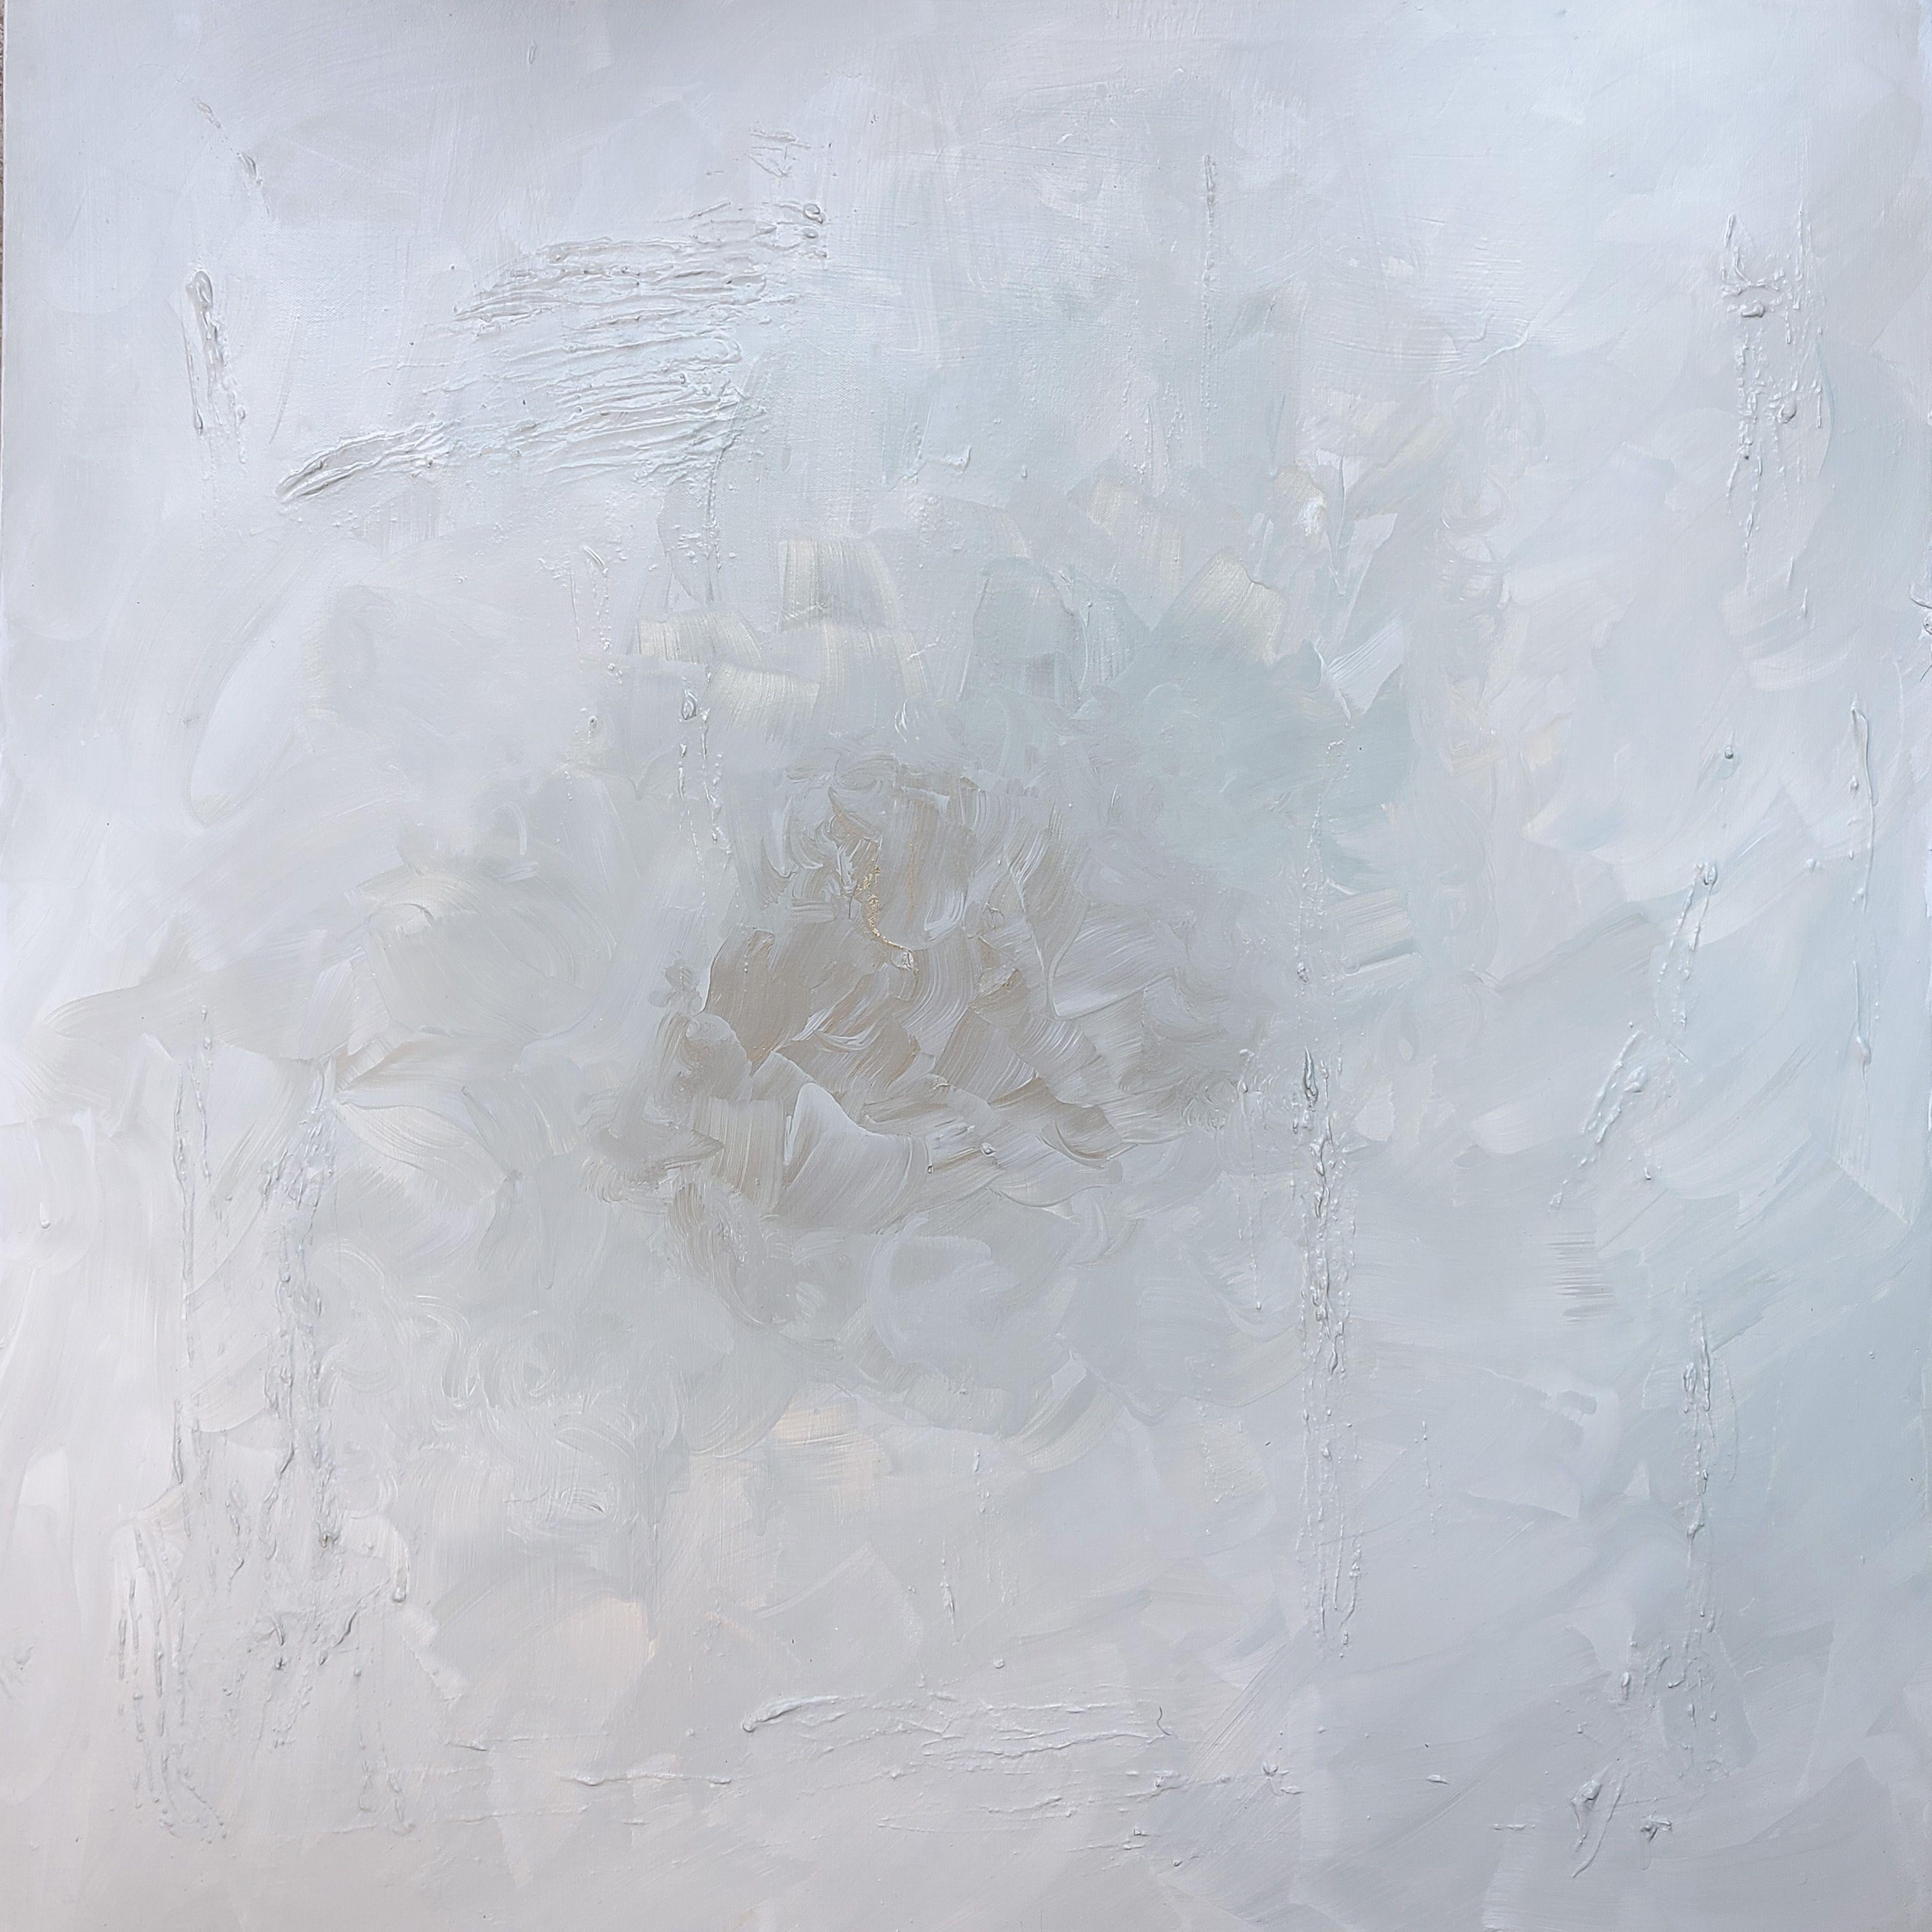 WHITE FLOWER is an original abstract painting created with acrylics and mediums (textures) on stretched, gallery-wrapped canvas. This painting will be shipped ready to hang. Soft whites, bronze and greys with surface texture compose this artwork. A